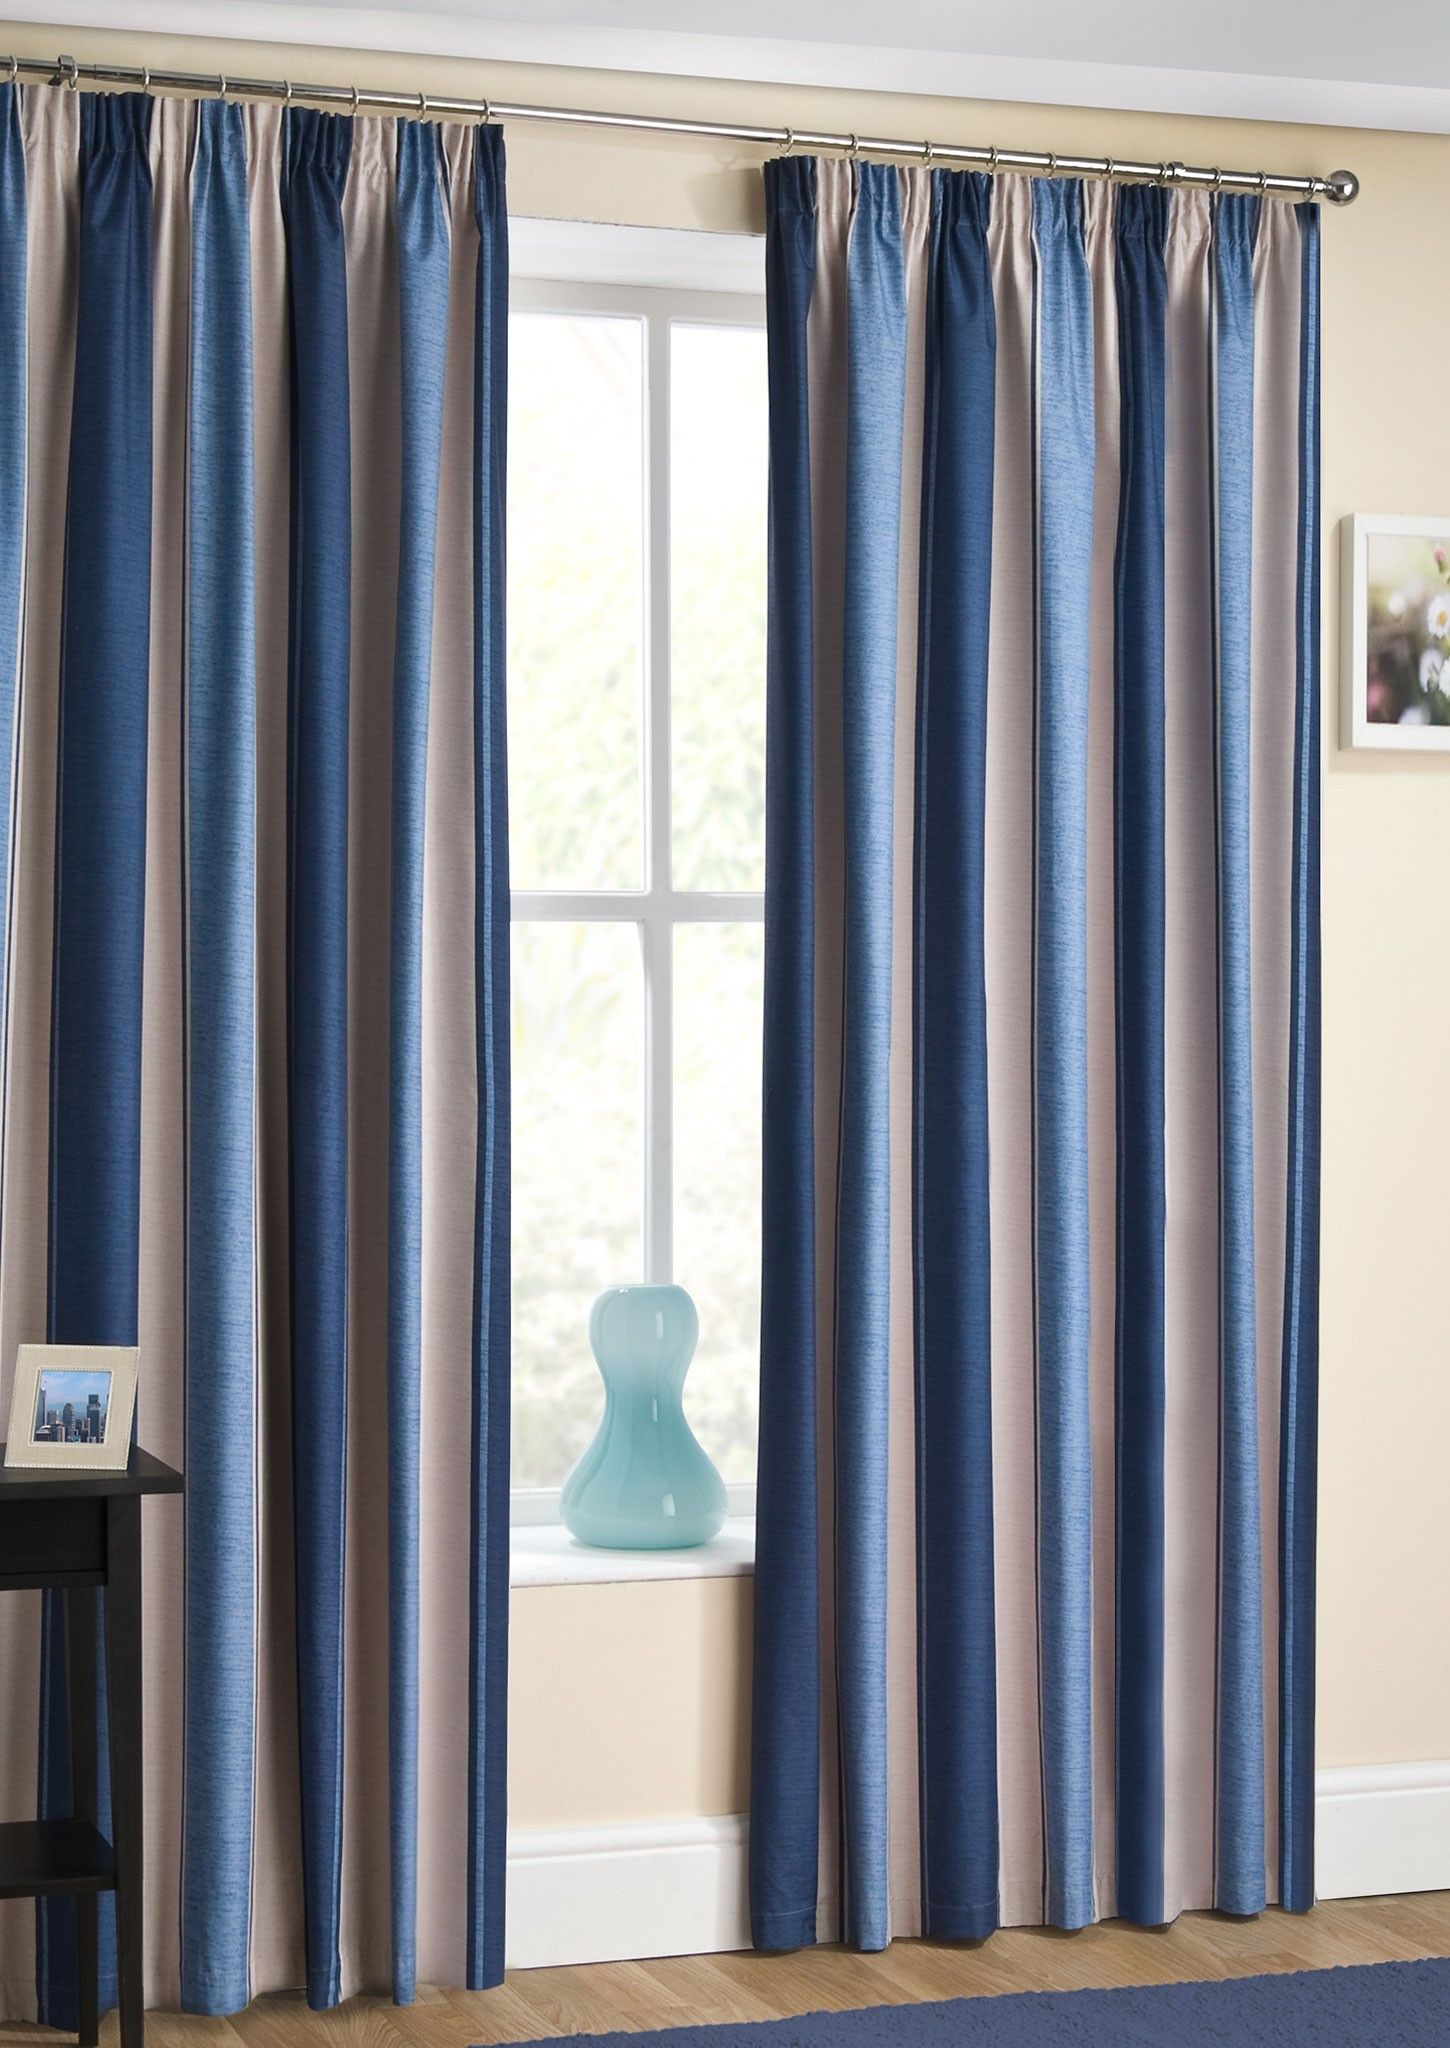 Twilight Navy Thermal Pencil Pleat Curtains With Pencil Pleat Blackout Curtains (View 11 of 15)